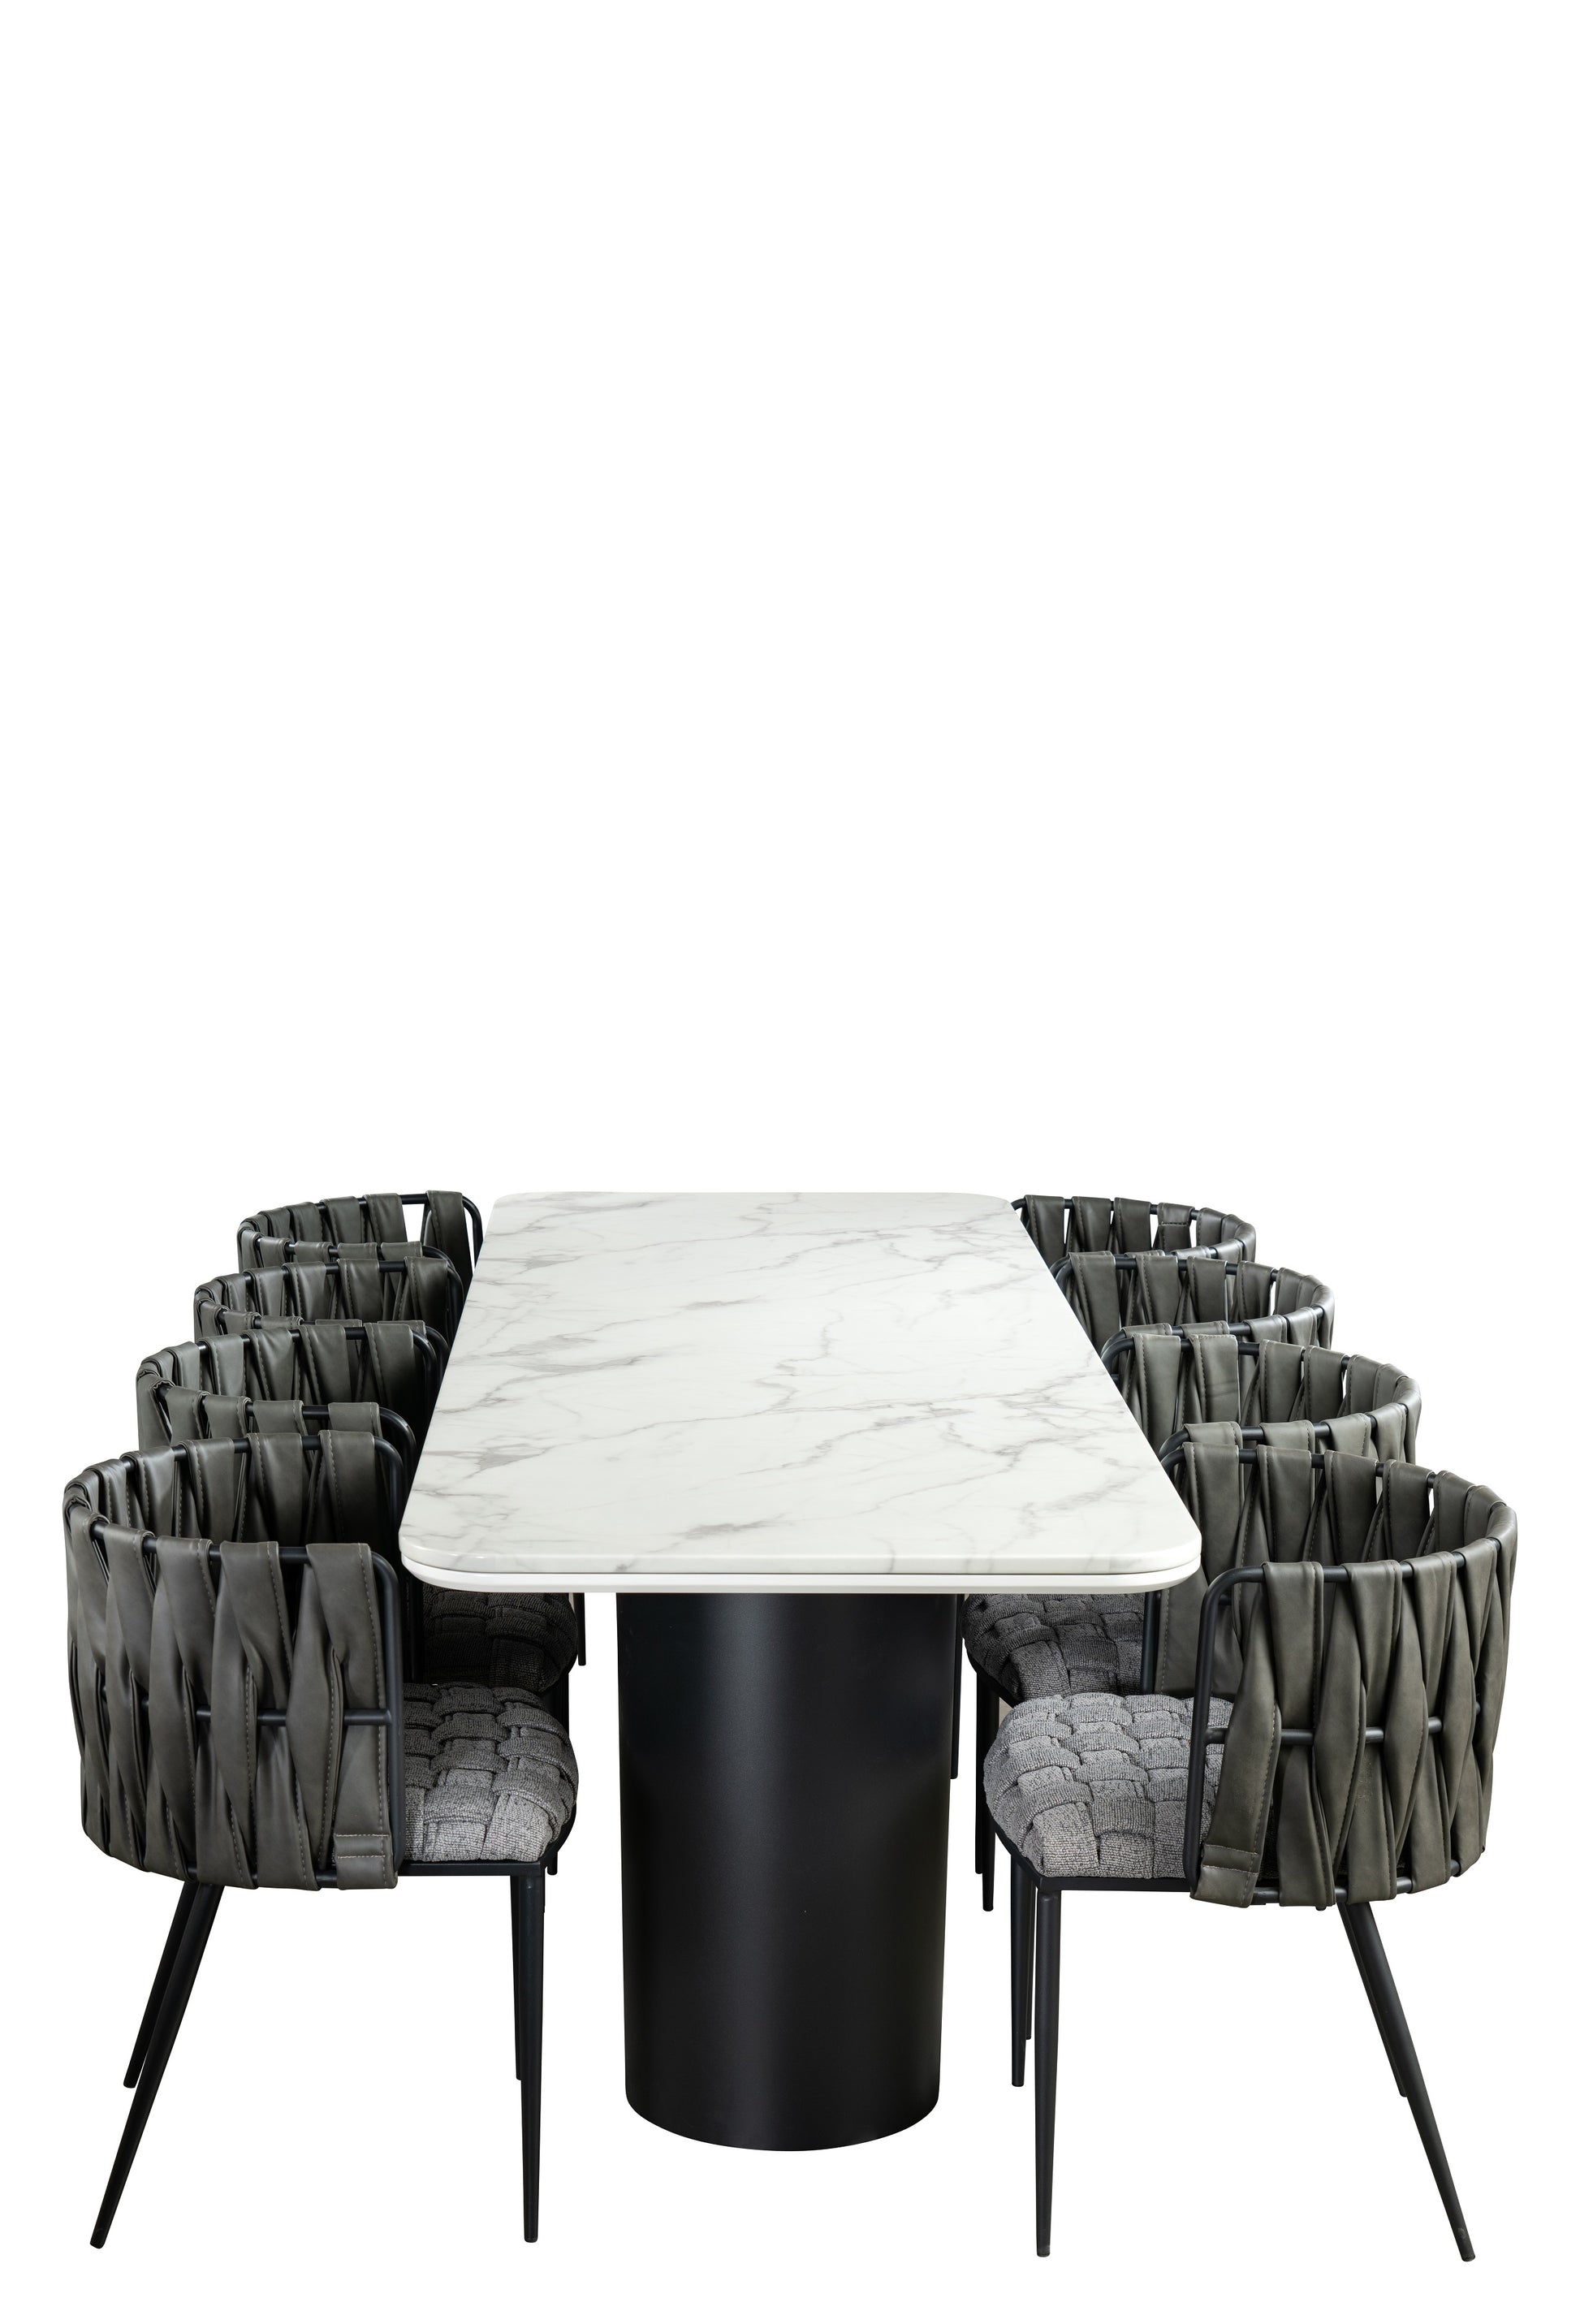 modern dining table set with chairs